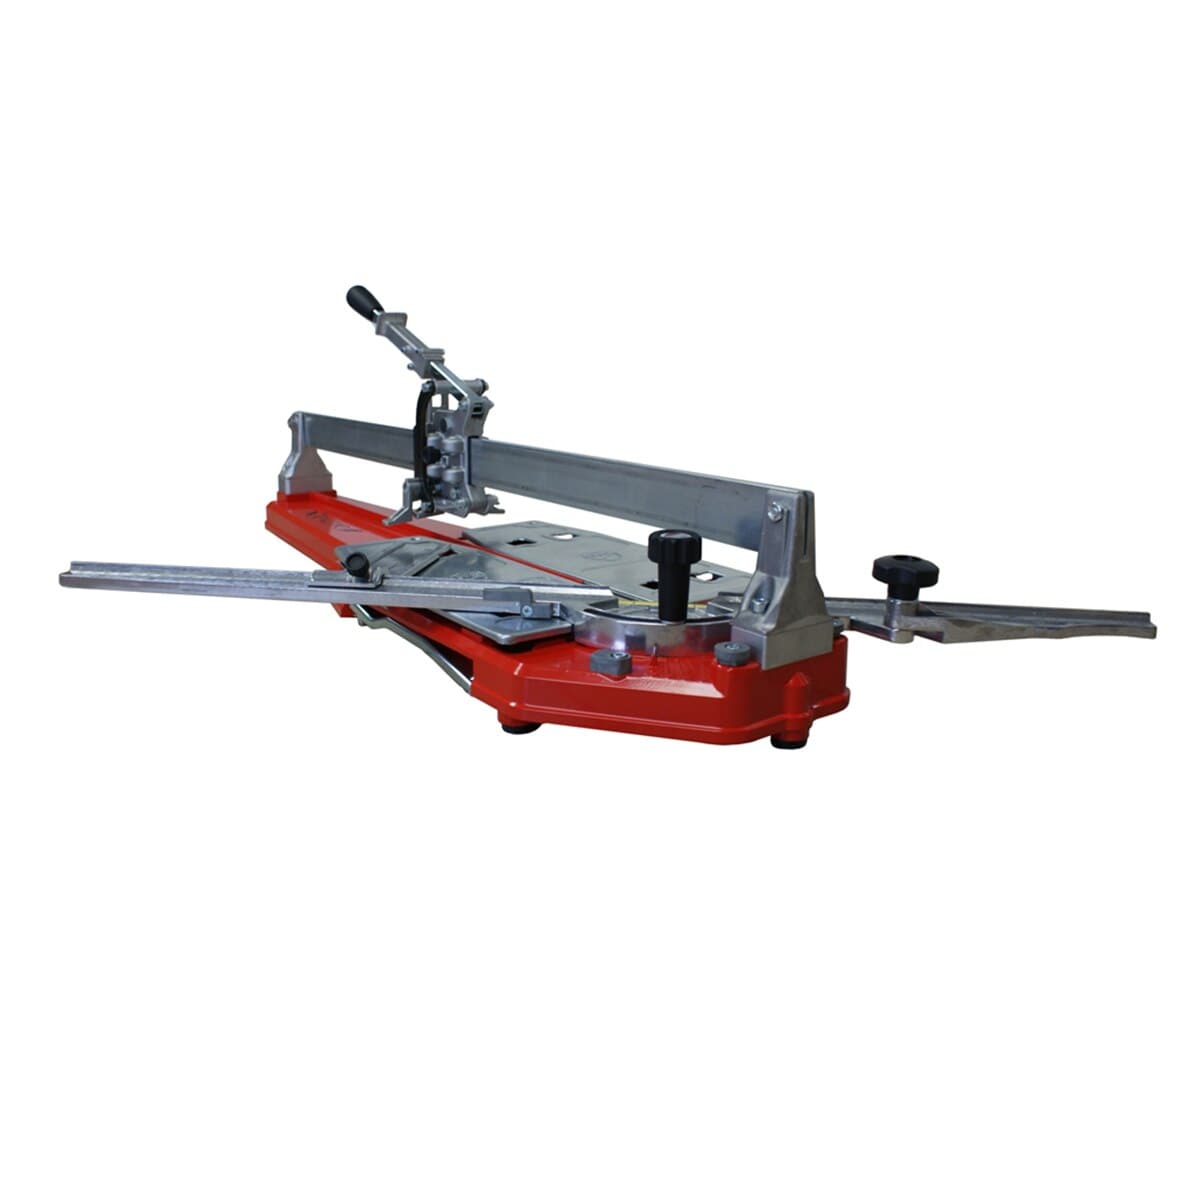 Pro Glass Tile Nippers - Tile Nippers and Tile Cutters